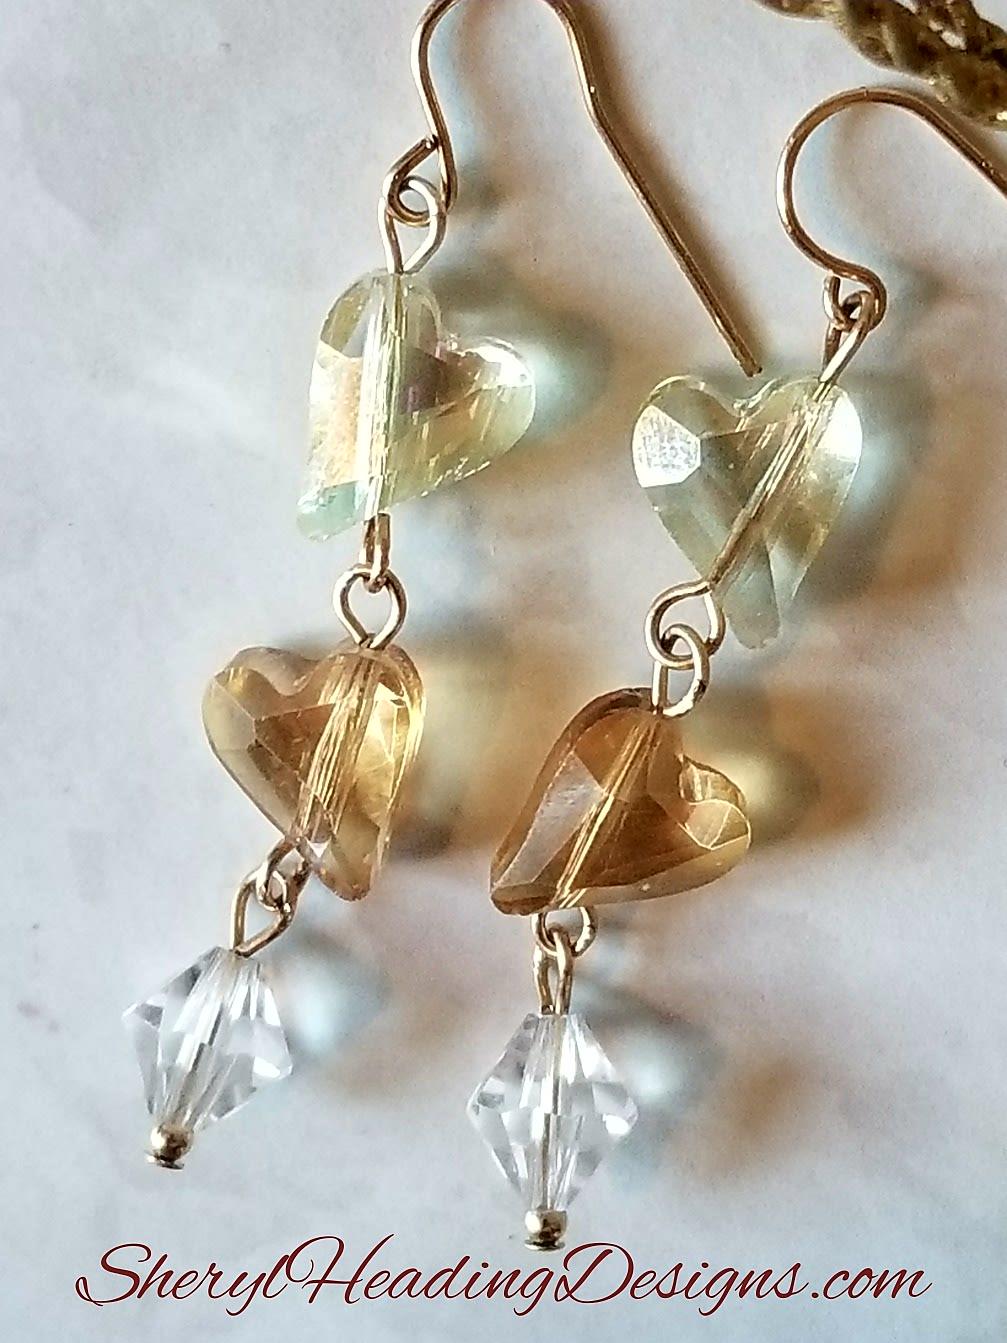 NEW ITEM!! Two Hearts Make One Earrings - Sheryl Heading Designs